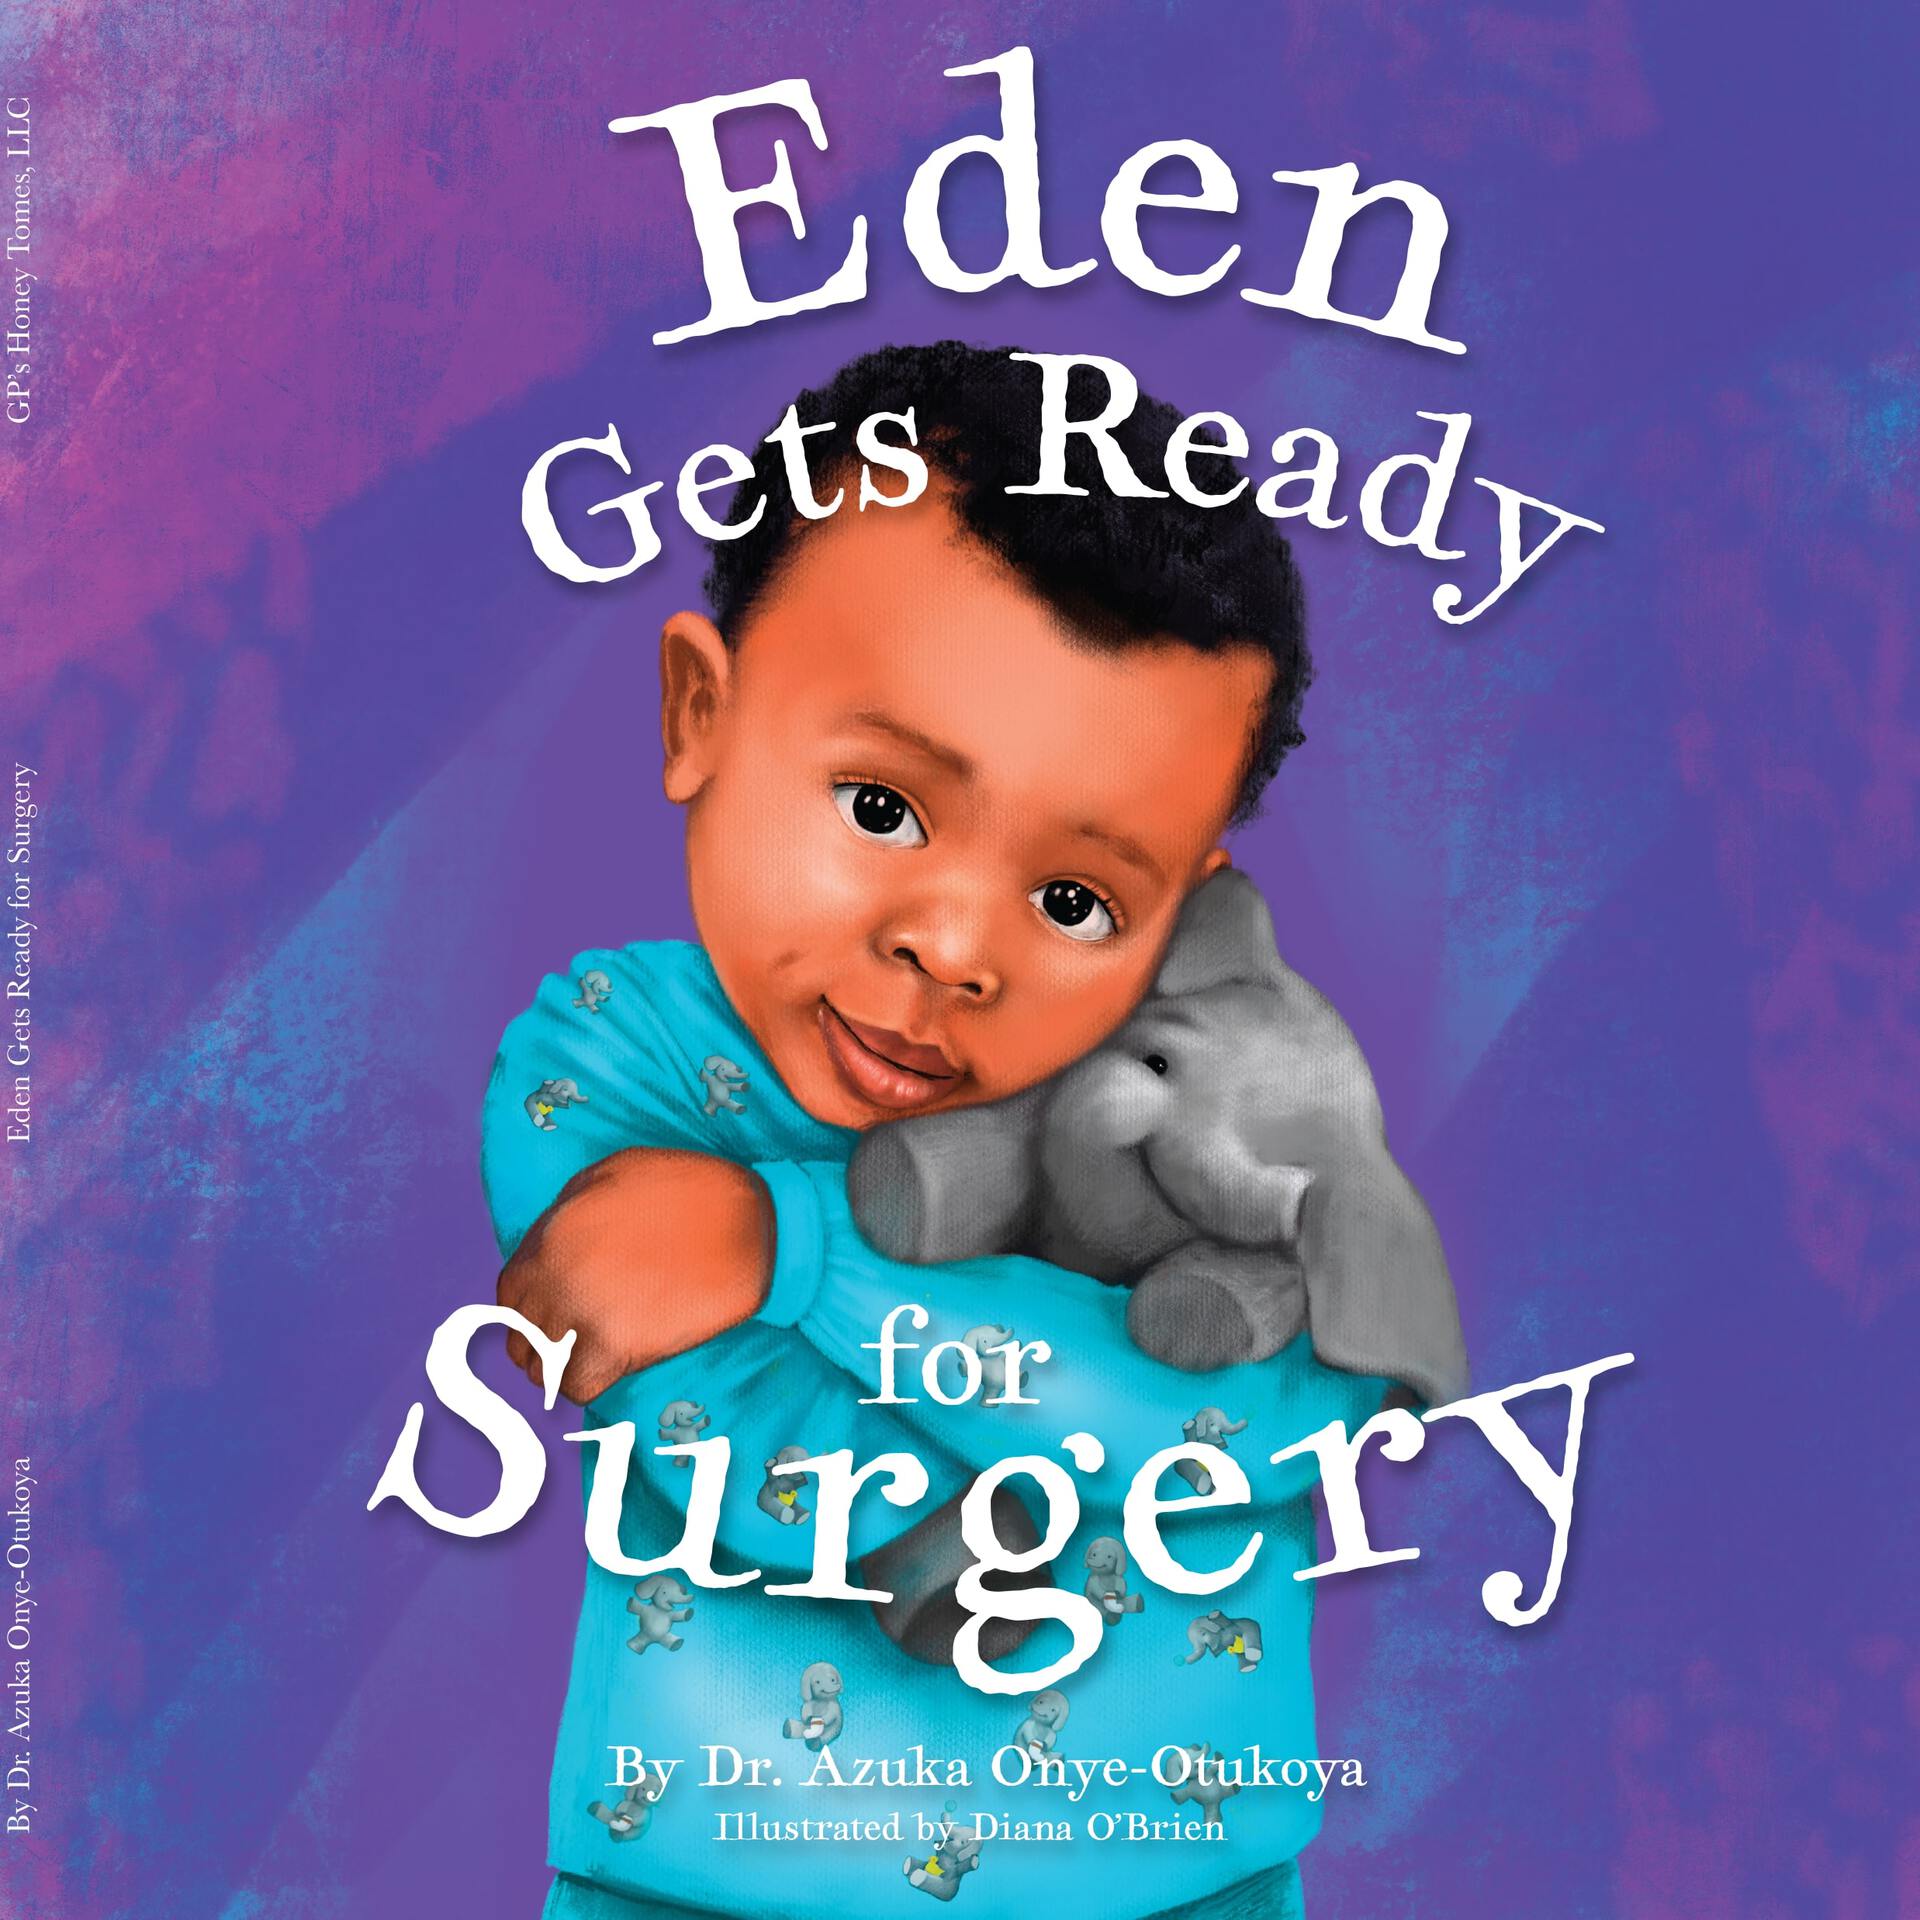 Eden Gets Ready for Surgery